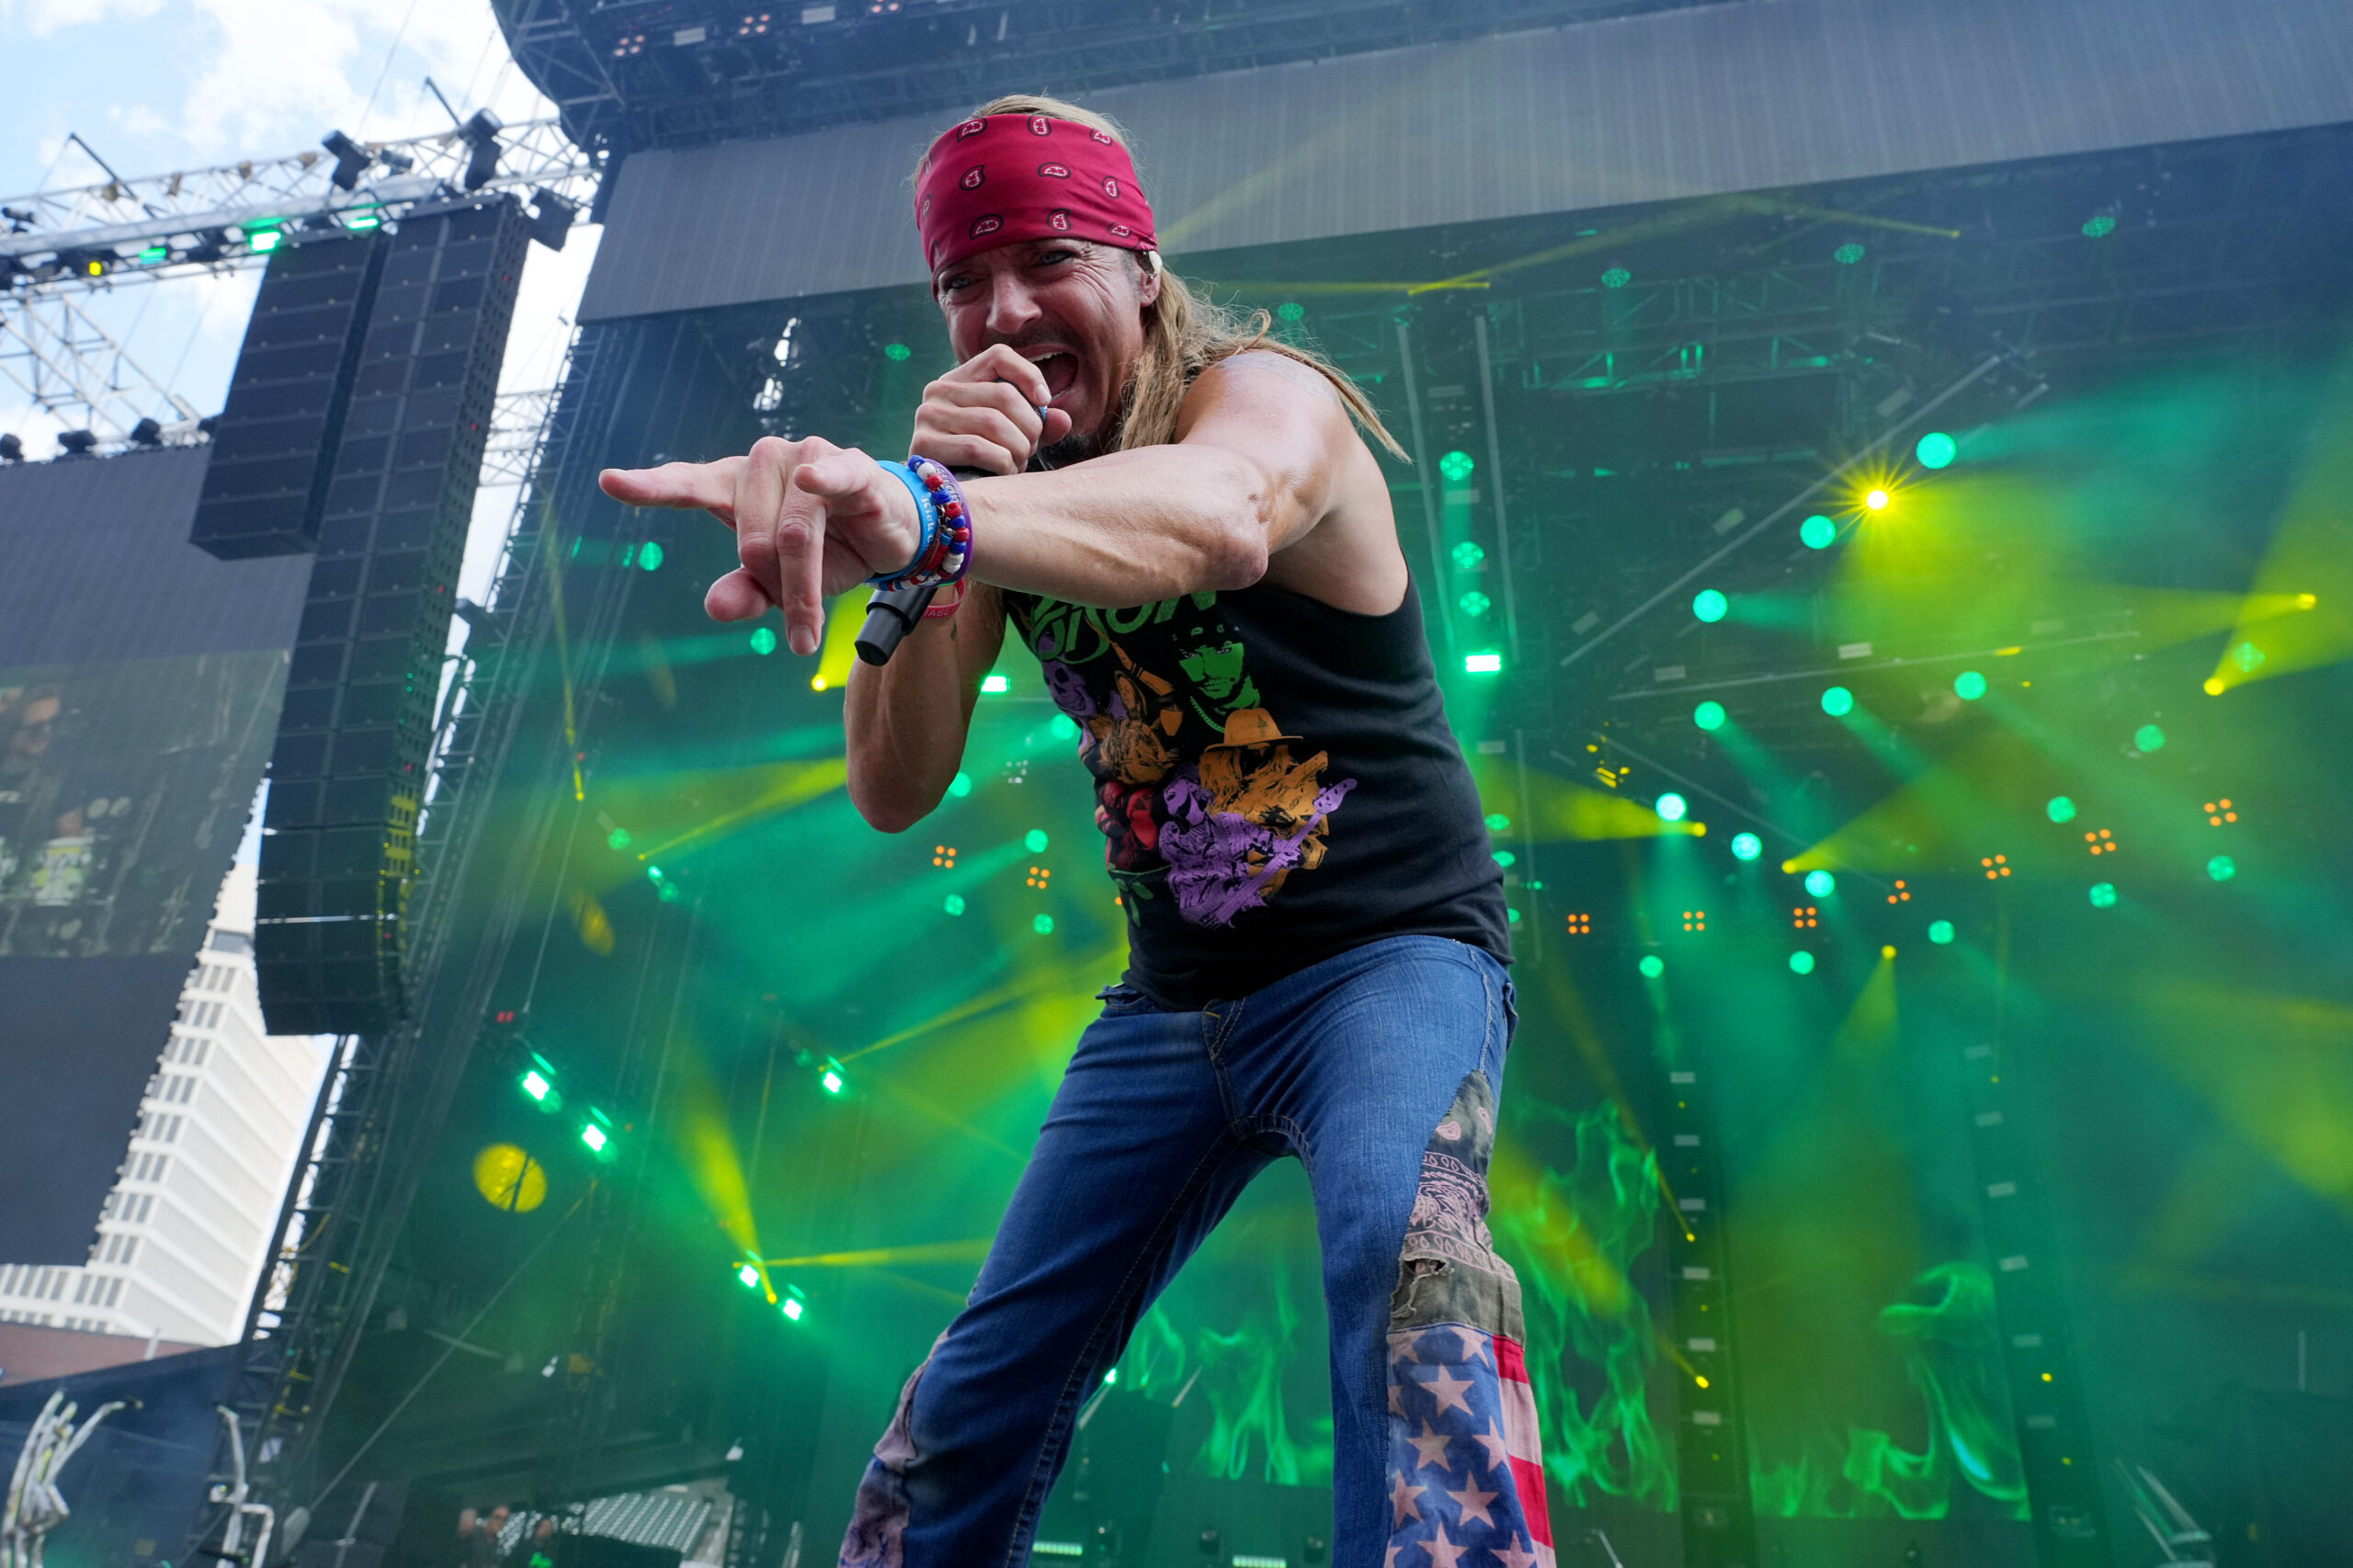 ATLANTA, GEORGIA - JUNE 16: Bret Michaels of Poison performs onstage (Photo by Kevin Mazur / Getty Images for Live Nation)